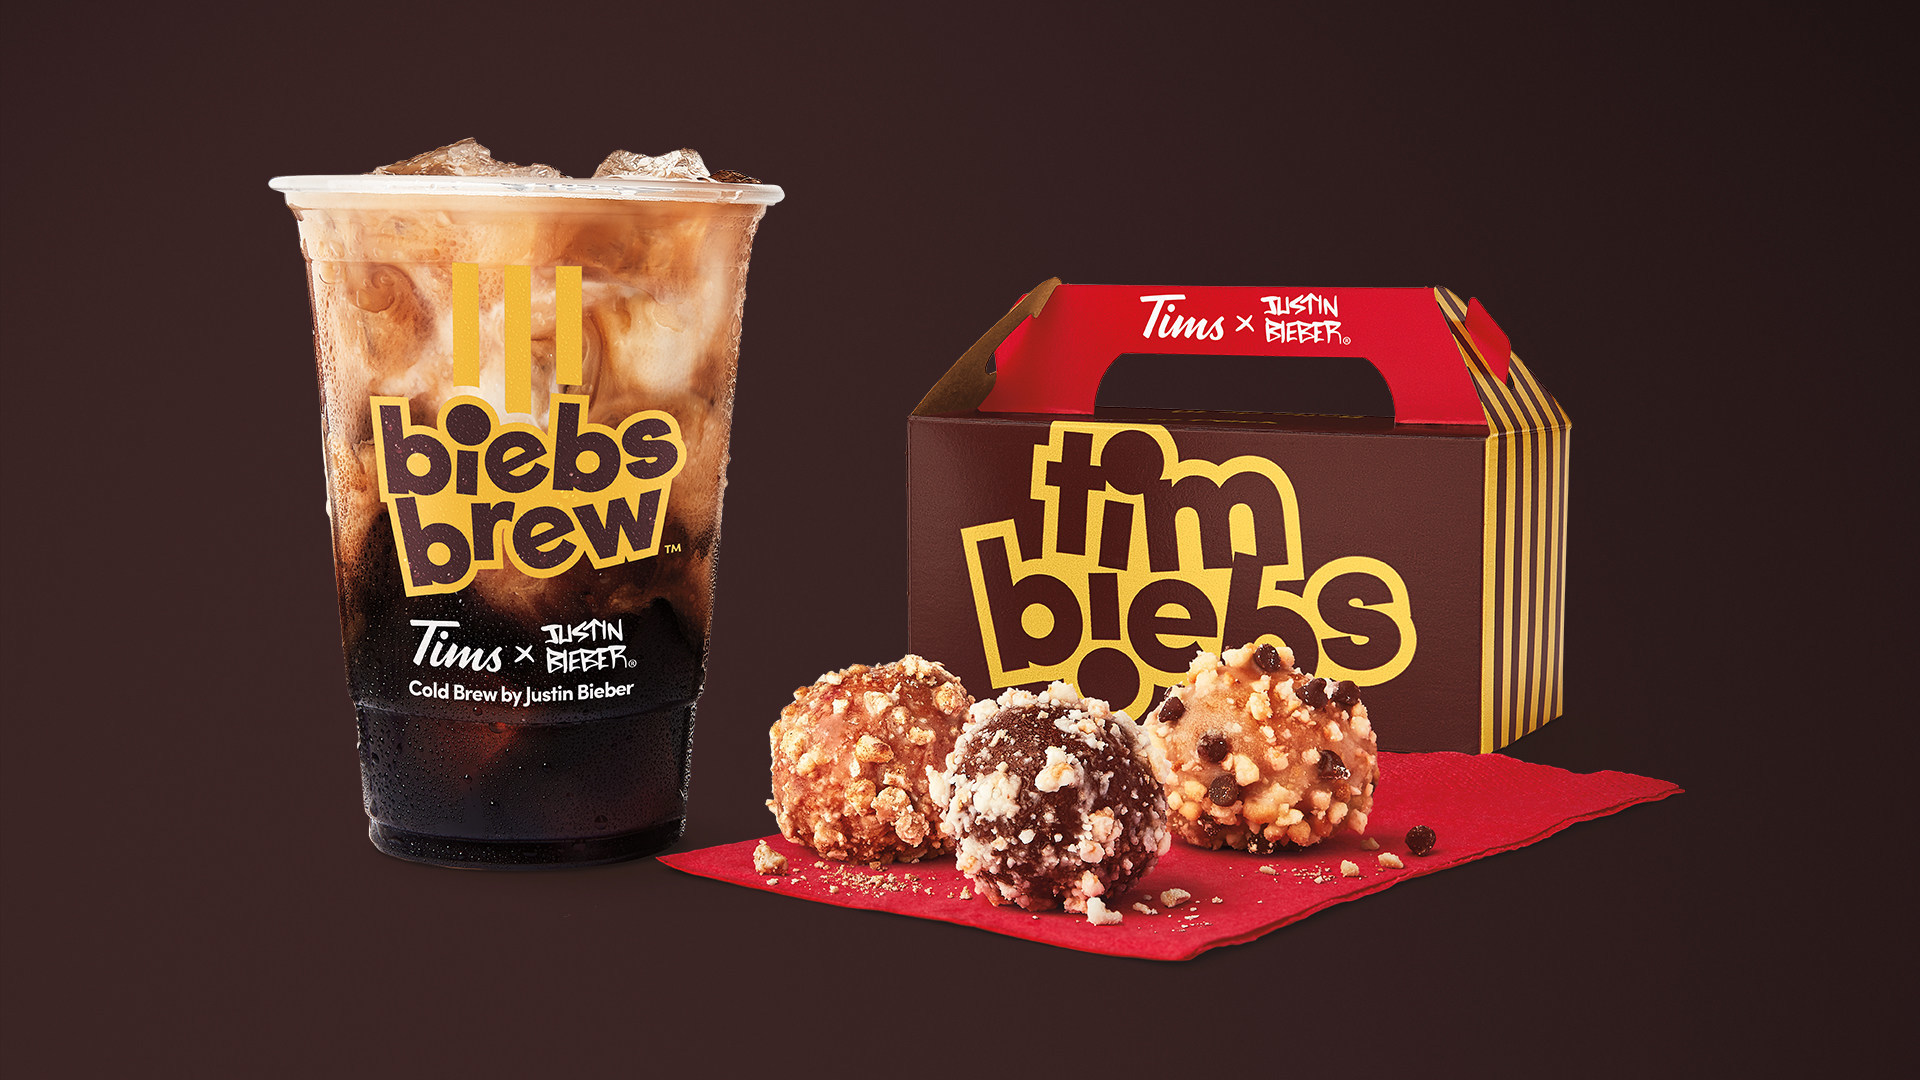 Tim Hortons-Introducing Biebs Brew- The much-anticipated next co